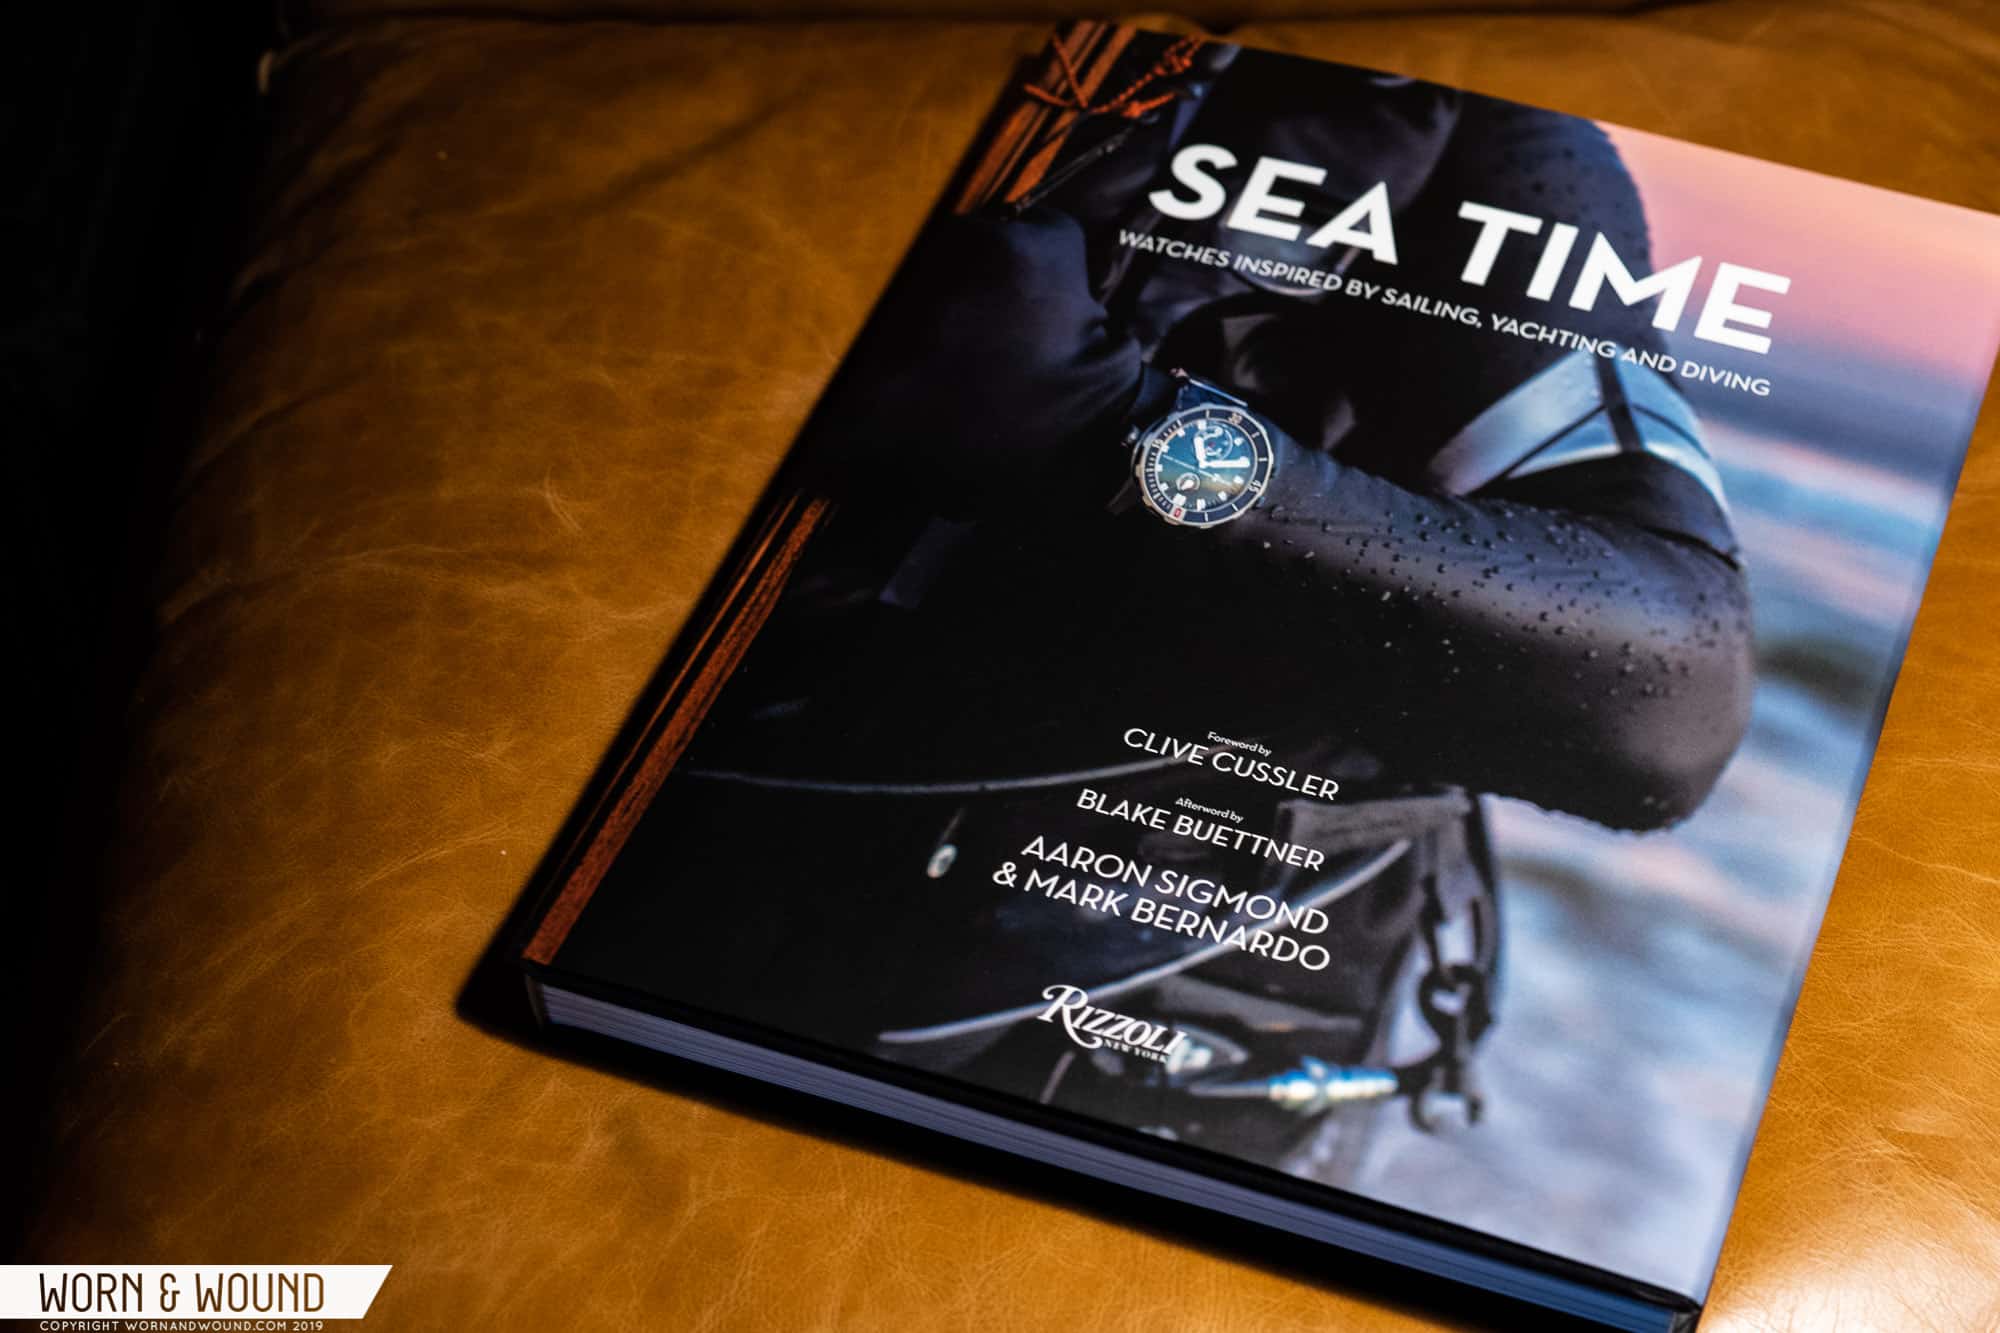 Book Review – Sea Time: Watches Inspired by Sailing, Yachting and Diving